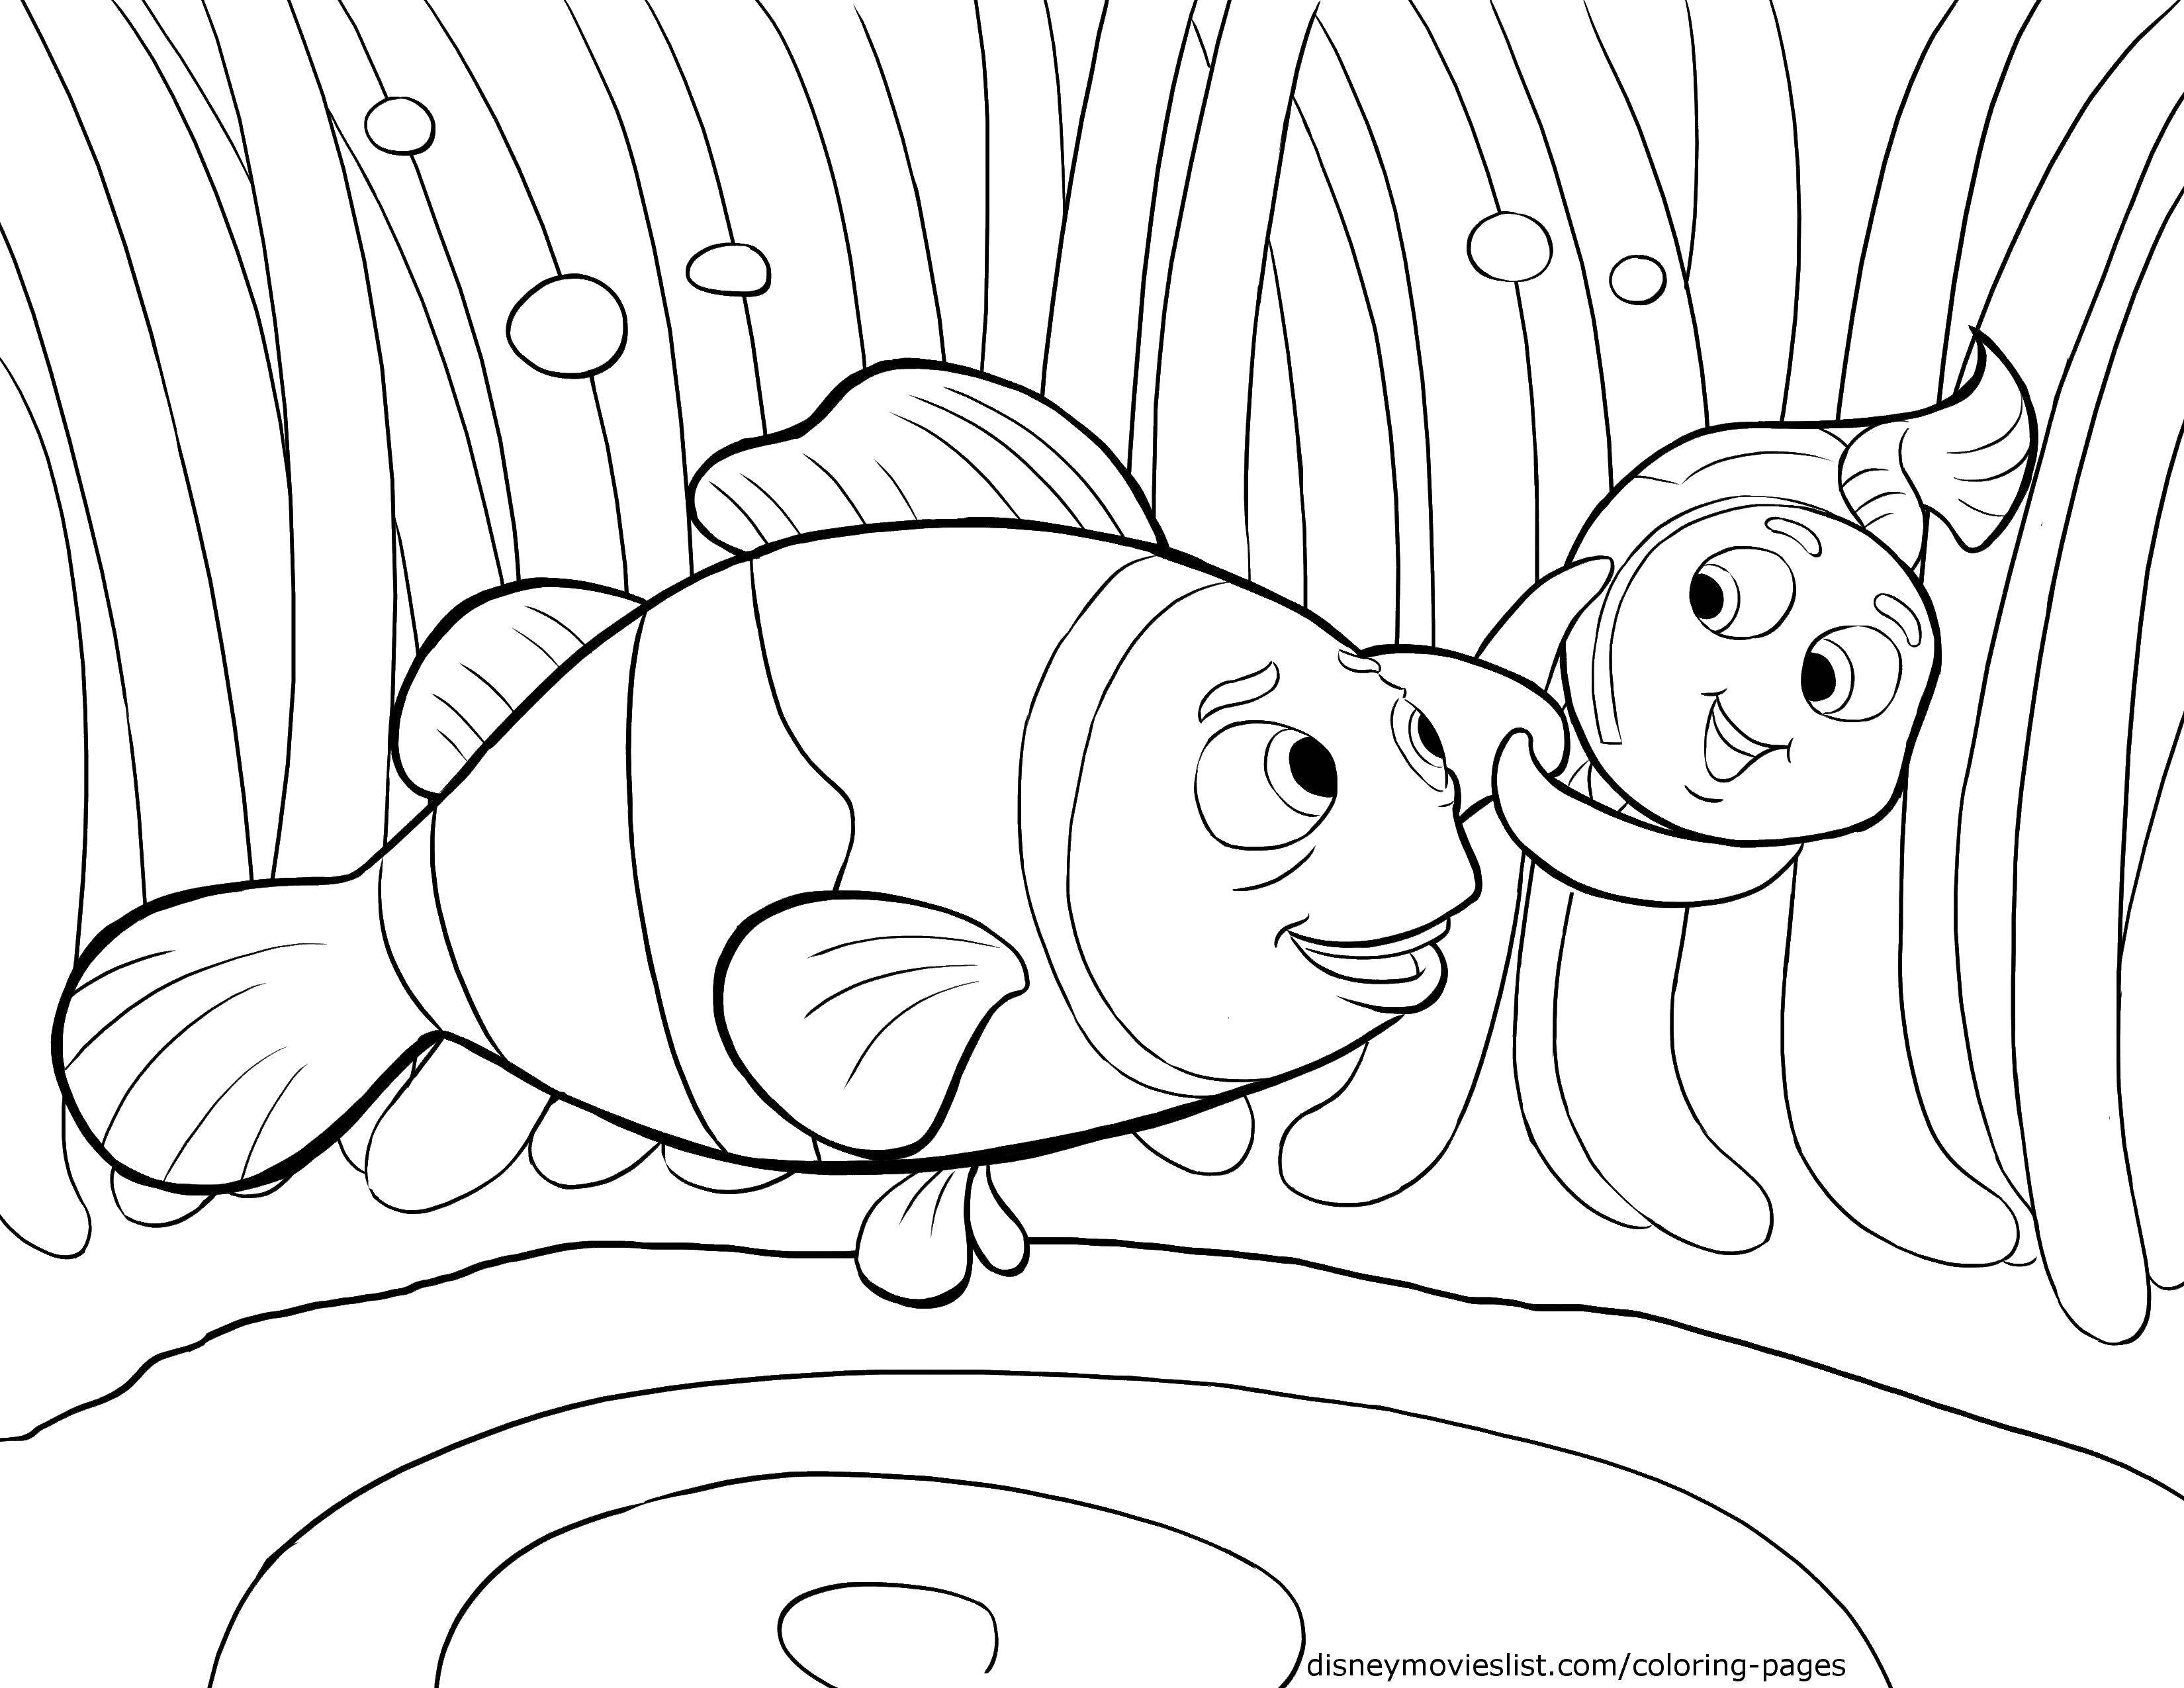 Coloring Cartoon Nemo. Category coloring. Tags:  in finding Nemo, Nemo, fish.